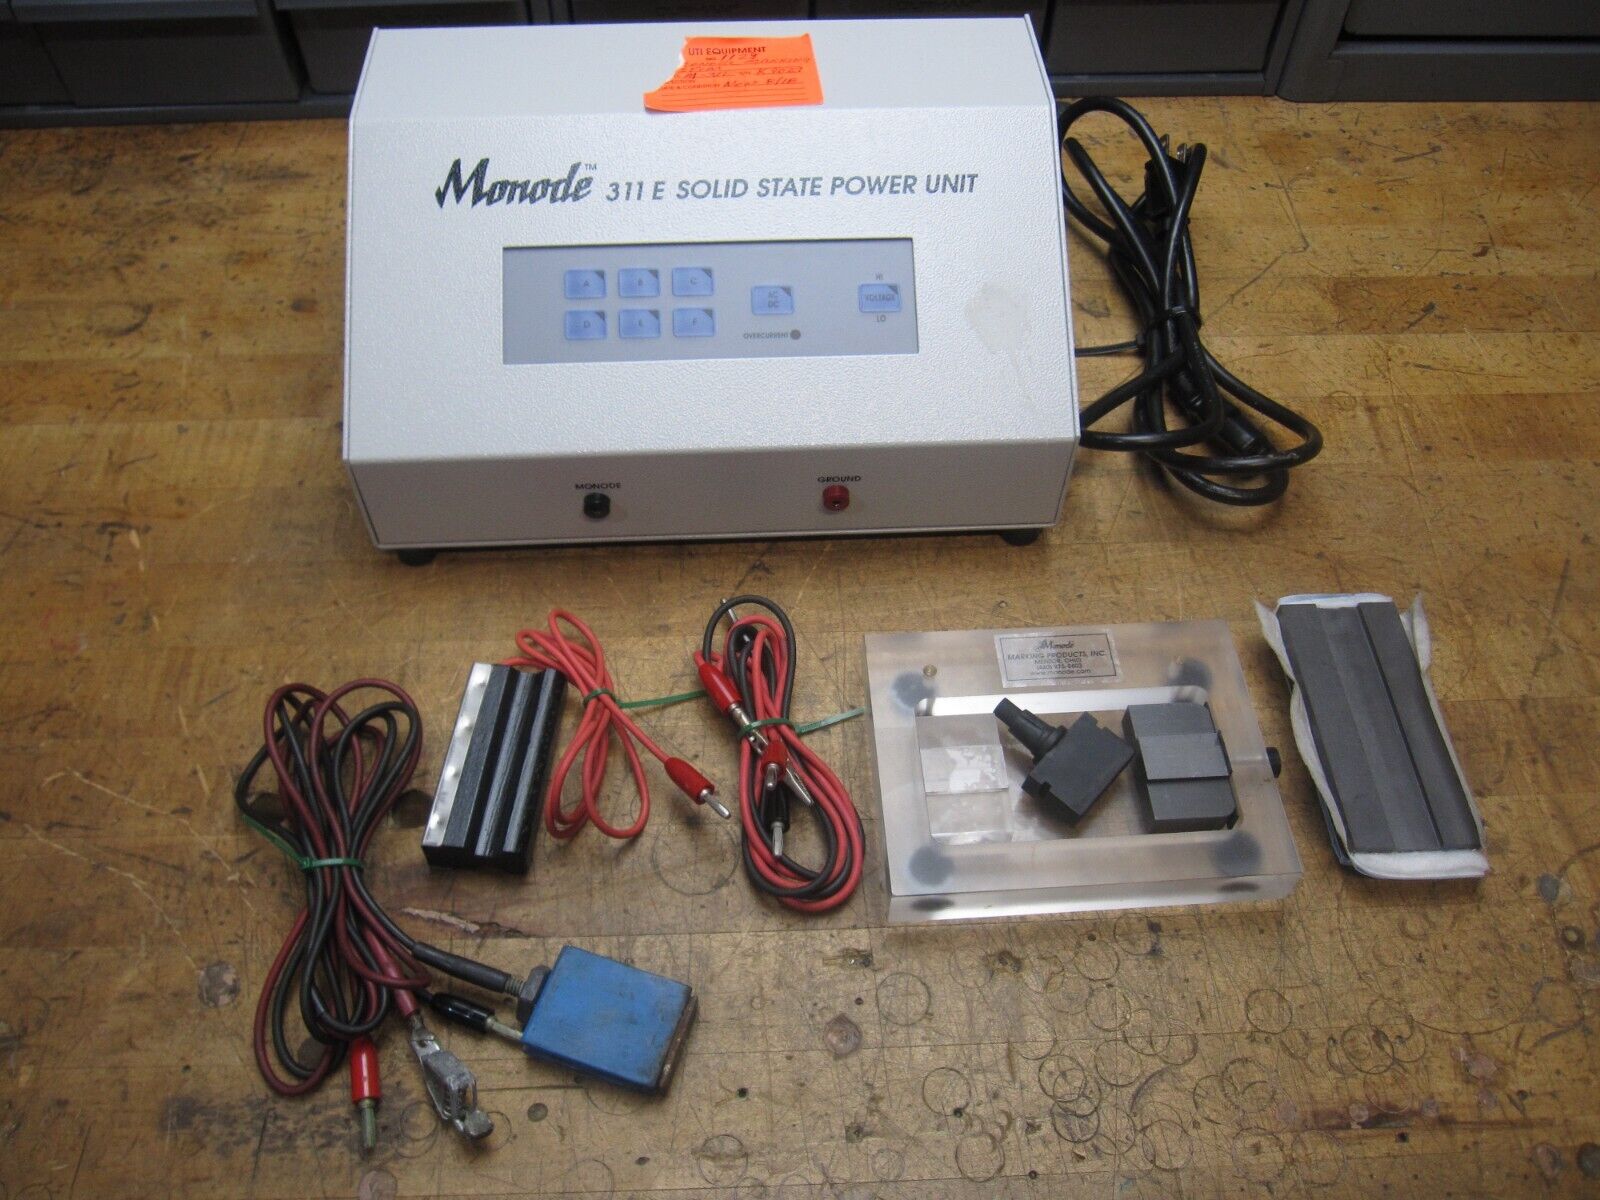 Monode Marking Units 311 E Solid State Power Unit for etching